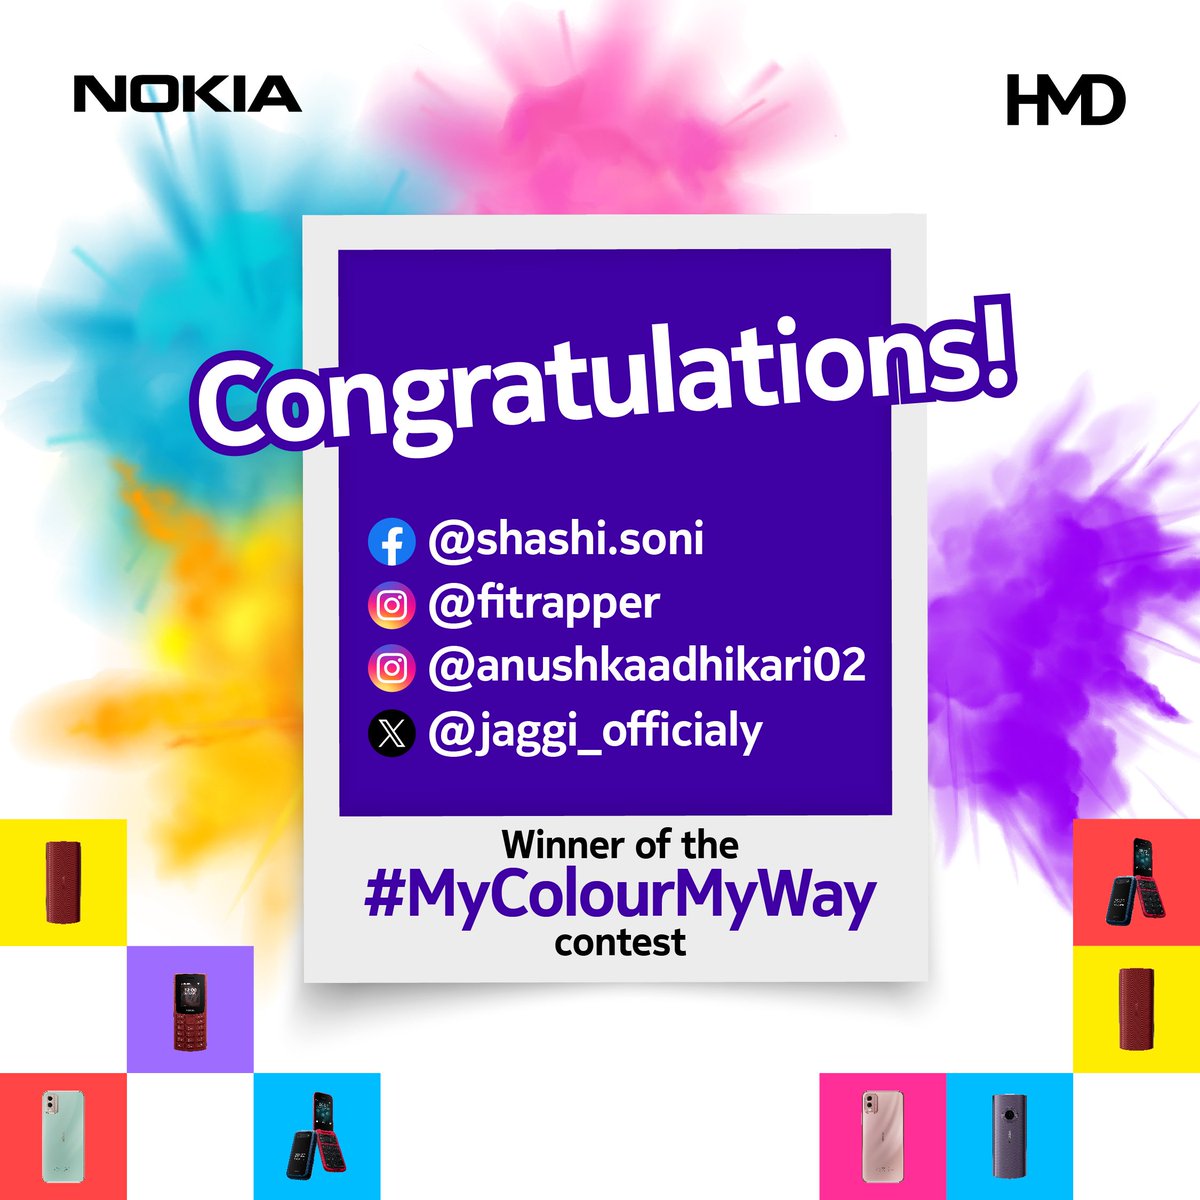 Congratulations to all the winners on winning the #MyColourMyWay Holi contest! Keep the party going as you have just won an all-new Nokia phone. We also thank our followers for their enthusiastic participation. Please stay tuned to this page for the latest details on upcoming